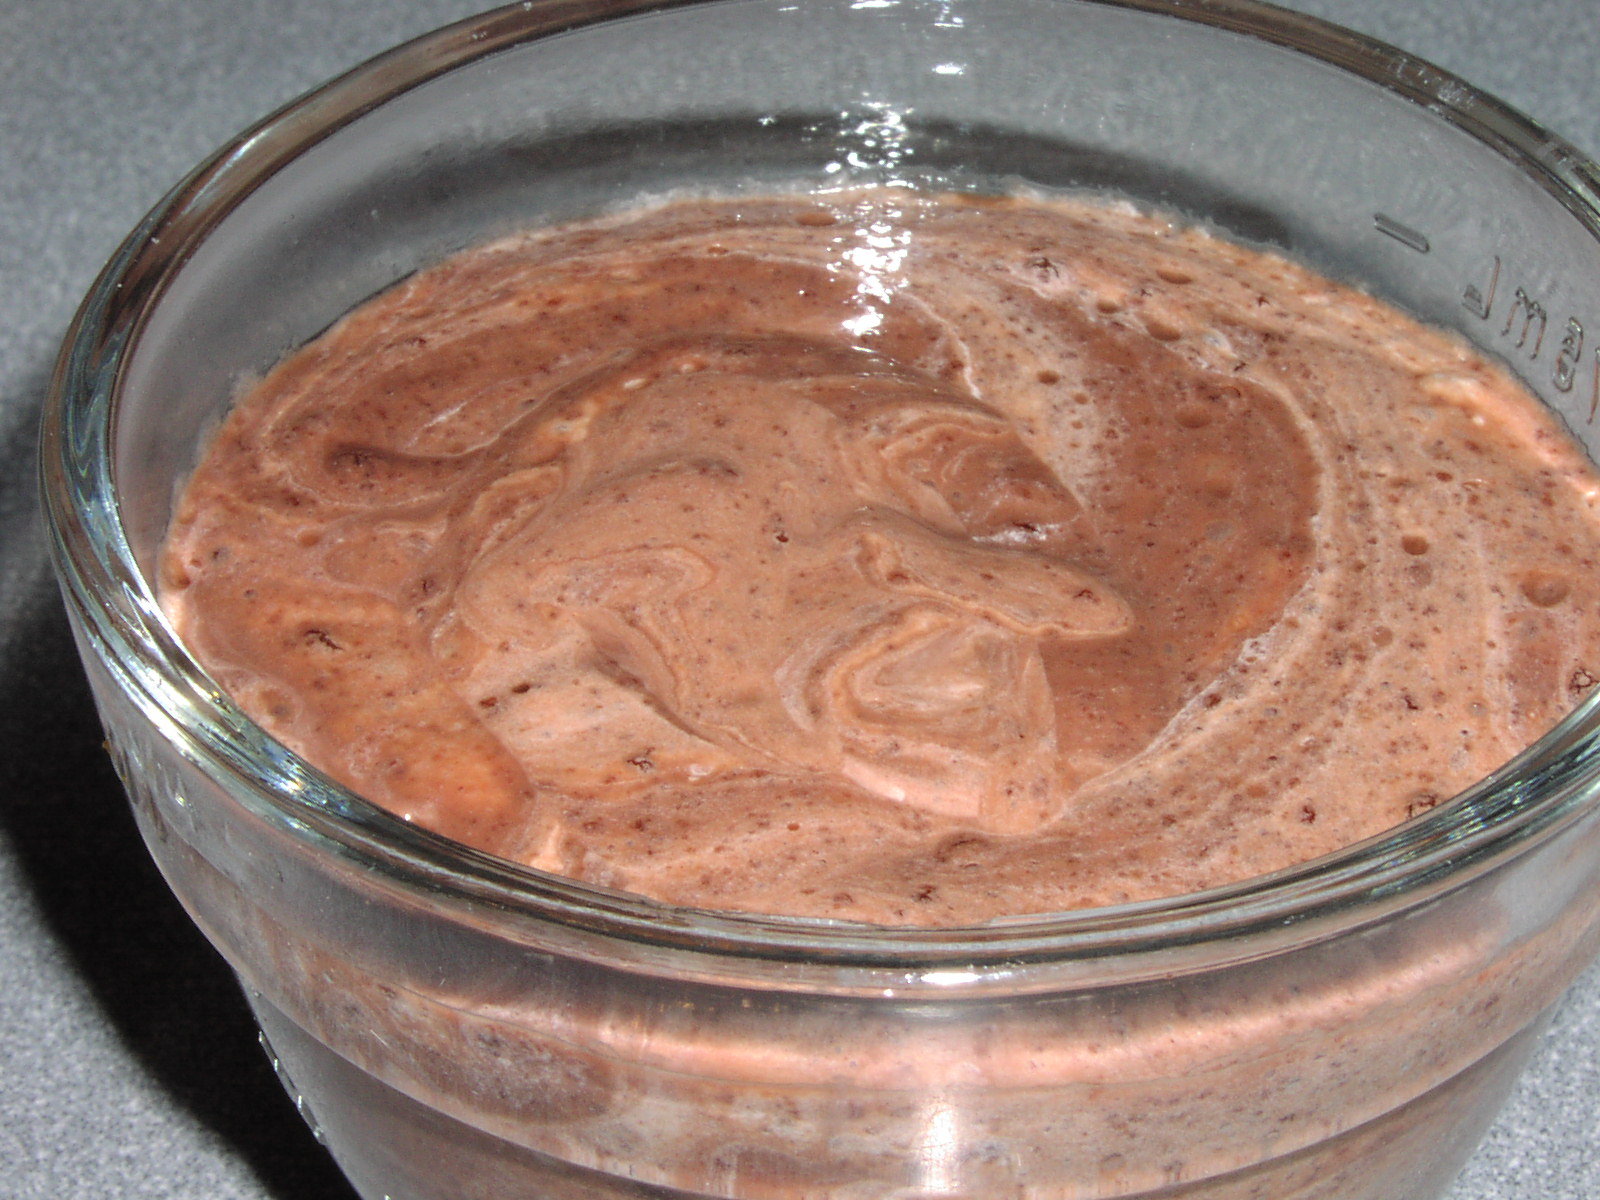 ✪ Recipe LOW-CARB LOW-CAL LOW-FAT FROSTY PUDDING TREAT